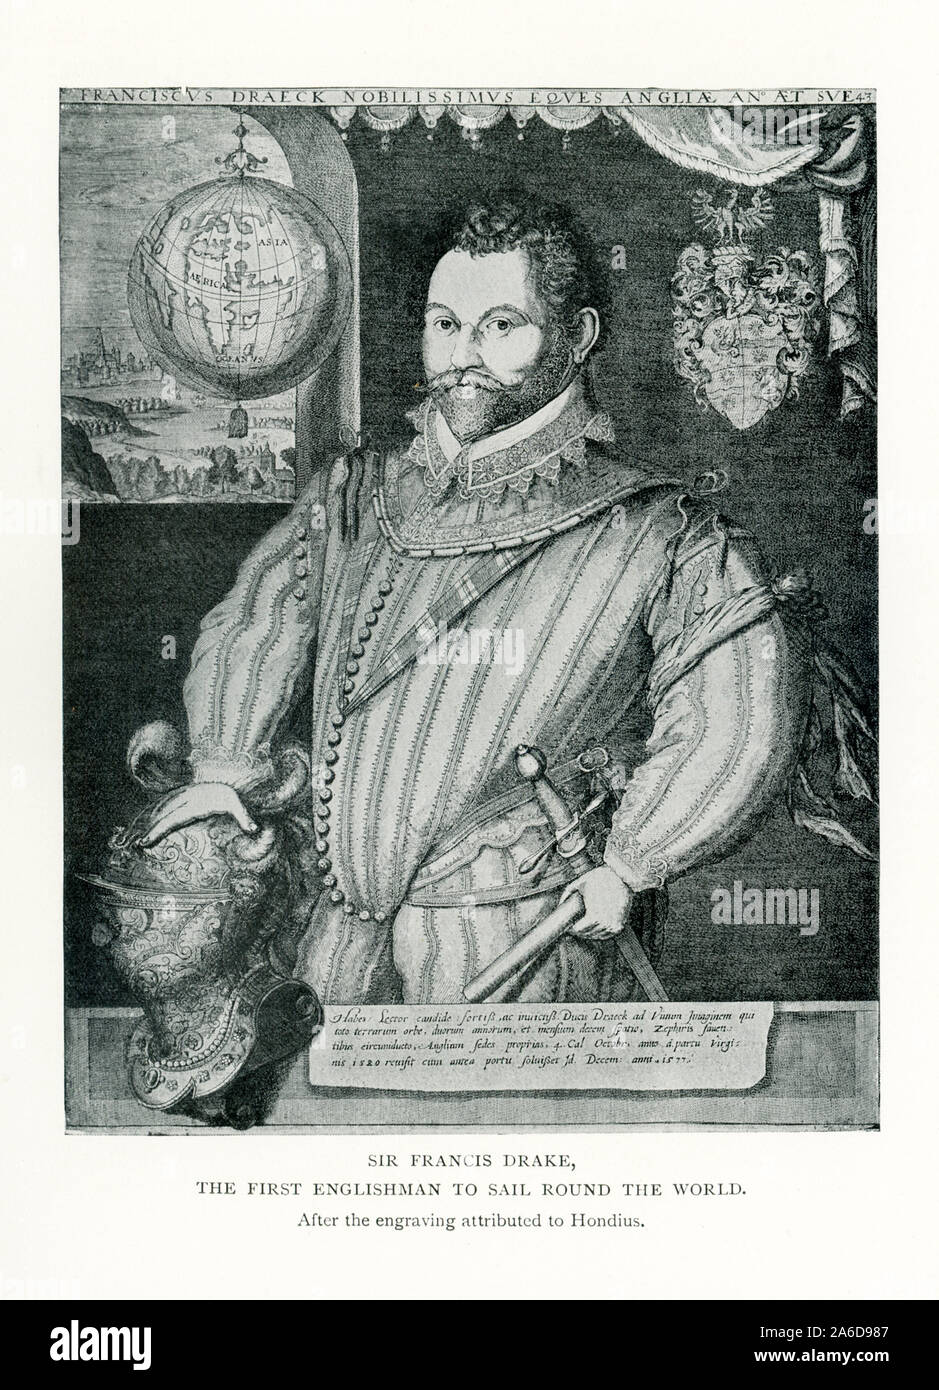 This images dates to 1912. It shows Sir Francis Drake and the caption reads: Sir Francis Drake. The First Englishman to Sail Round the World. It is based on an engraving attributed to Hondius. Jodocus Hondius (in Dutch: Joost de Hondt) was a Flemish engraver and cartographer. He was born in 1563 and died in 1612. Drake carried out the second circumnavigation of the world in a single expedition, from 1577 to 1580, and was the first to complete the voyage as captain while leading the expedition throughout the entire circumnavigation. Stock Photo